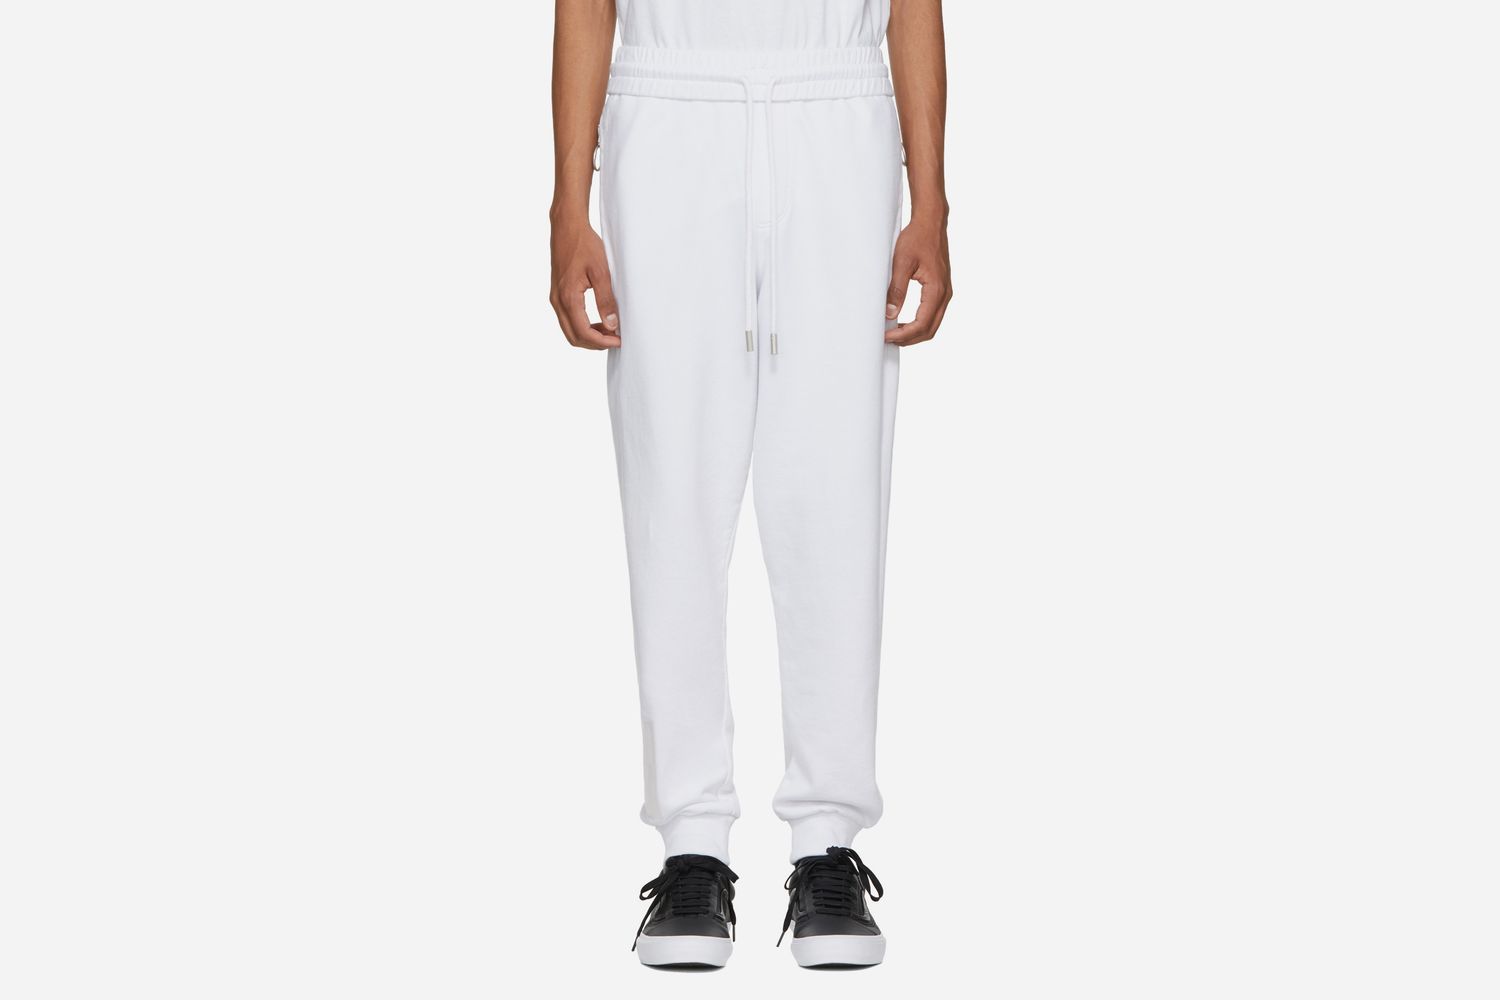 OFF-WHITE Pants: Our Top 10 Favorites to Cop this Spring